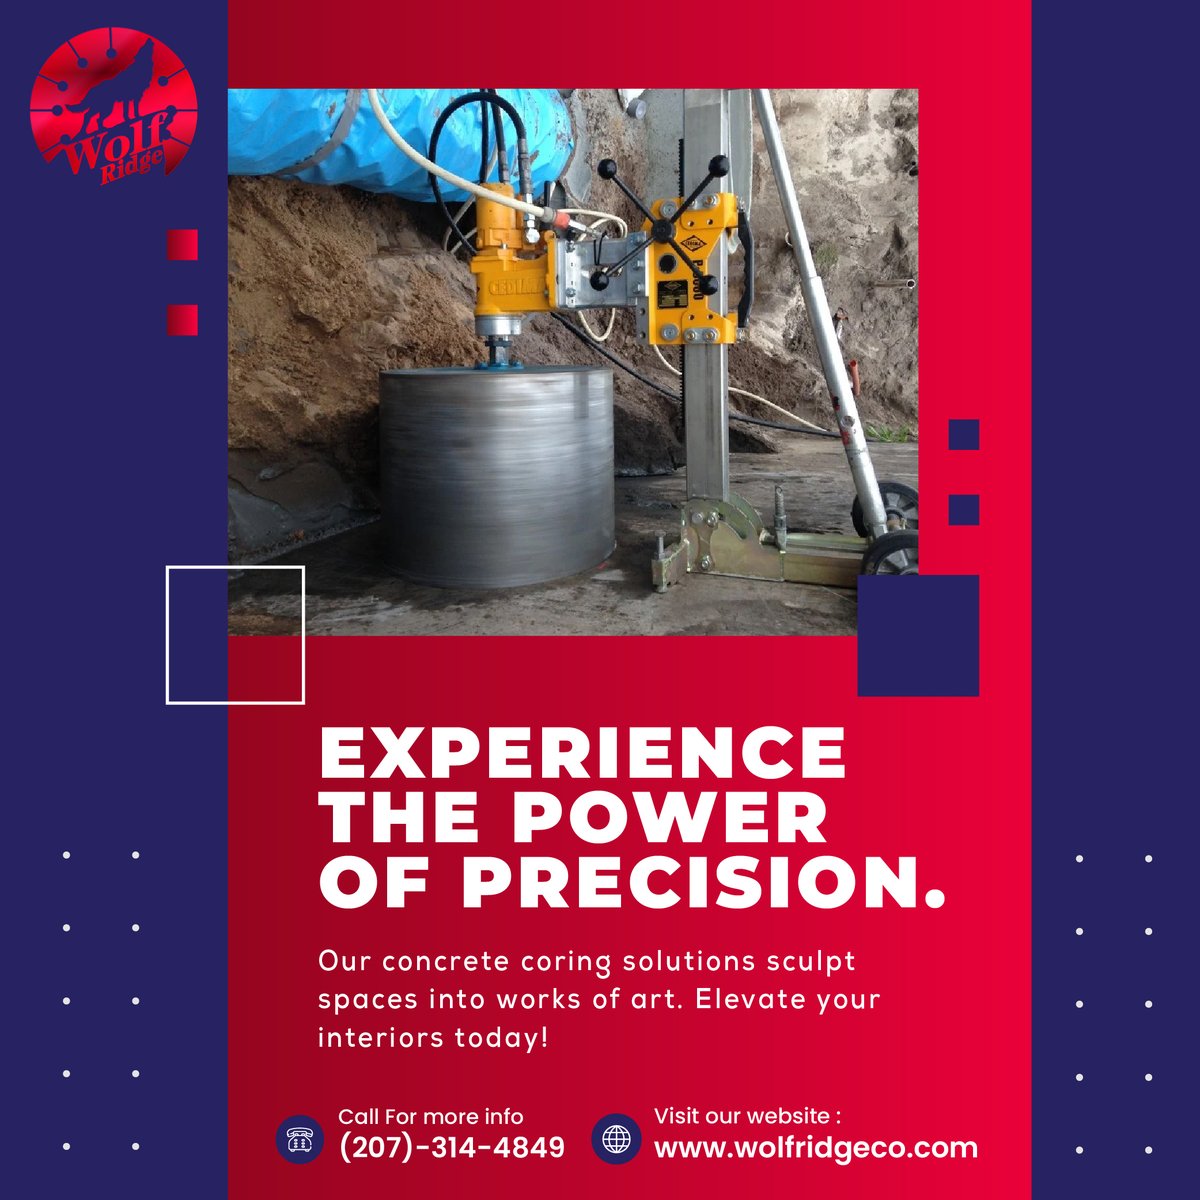 Precision and Passion: A Pairing for Perfection.

wolfridgeco.com

Email us at social@wolfridgeco.com
Contact us at 2073144849

#wolfridge #PowerOfPrecision #PrecisionPerfected #AccuracyMatters #DetailDriven #CraftsmanshipExcellence #PrecisionEngineering